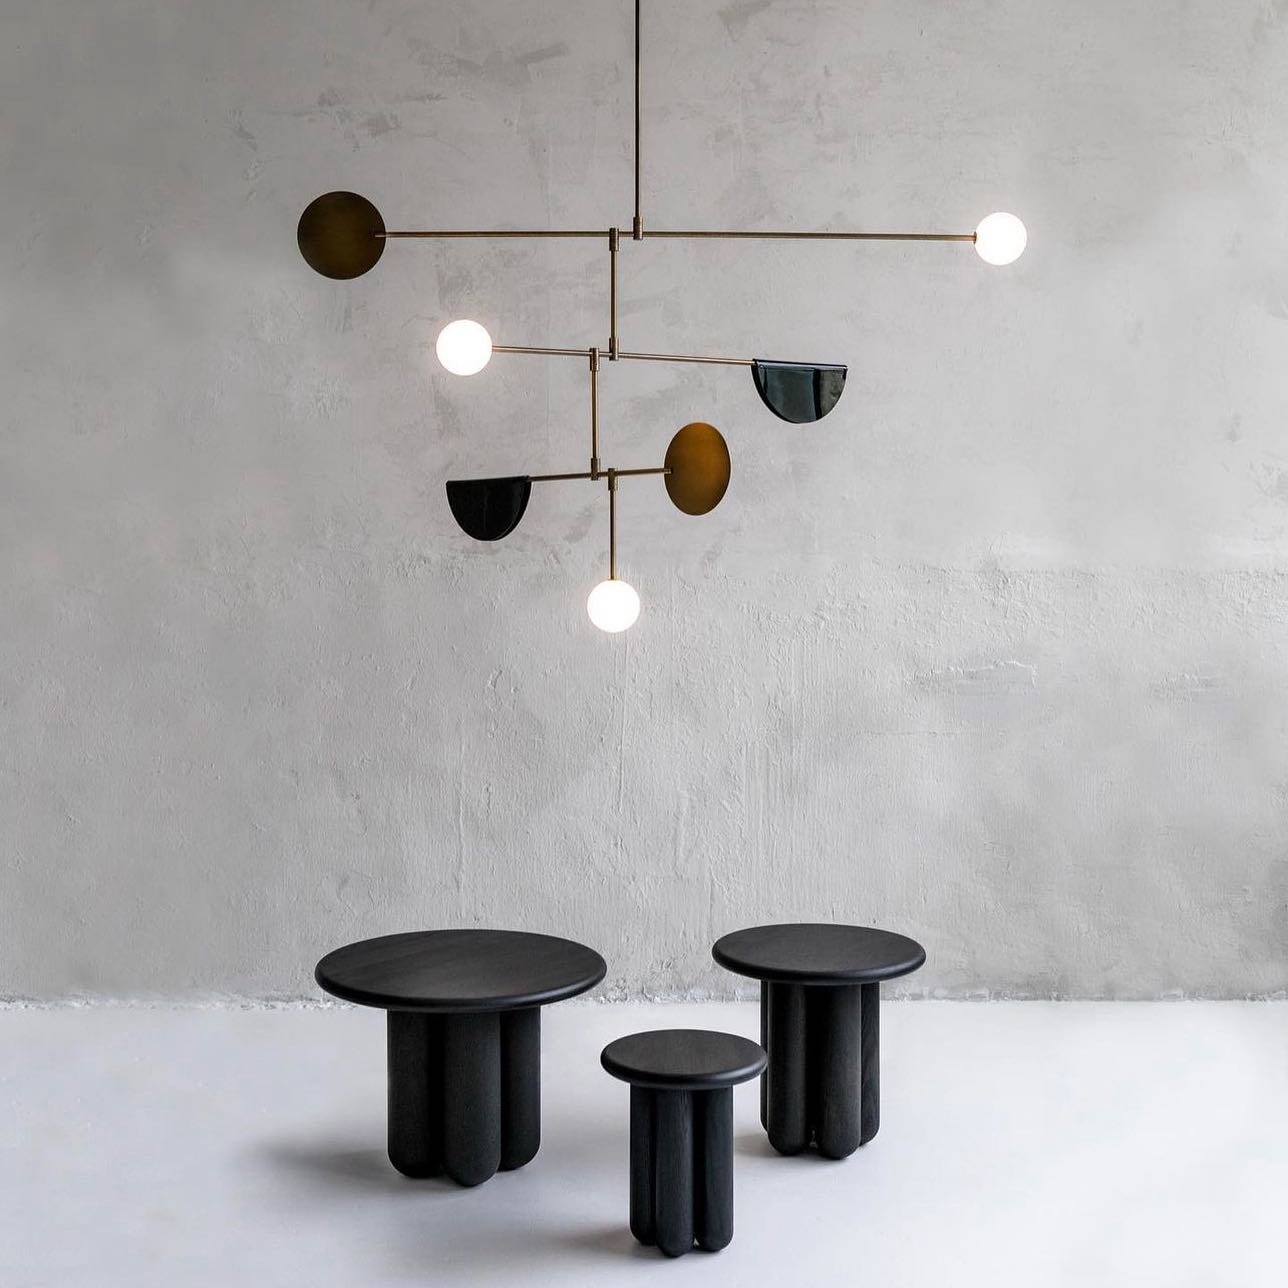 Introducing @anonystudio - a Toronto based lighting and product design studio with local manufacturing capabilities. Concerned with the entire life cycle of their product, anony designs products that last. Thoughtful and honest material choices resul